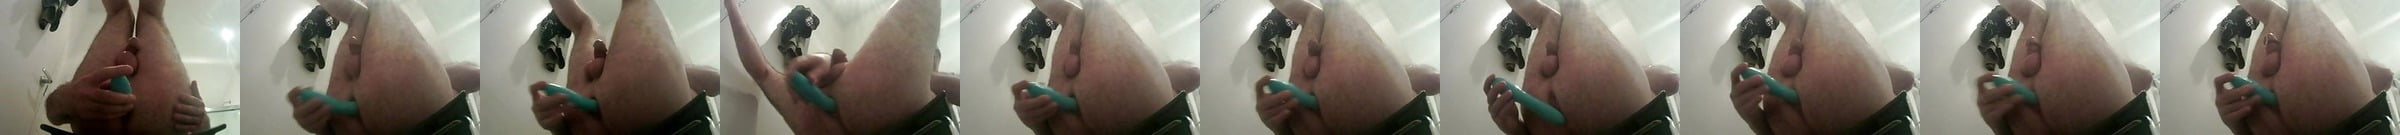 Anal Fuck With Handjob Cum In Ass Gay Porn 74 Xhamster Xhamster